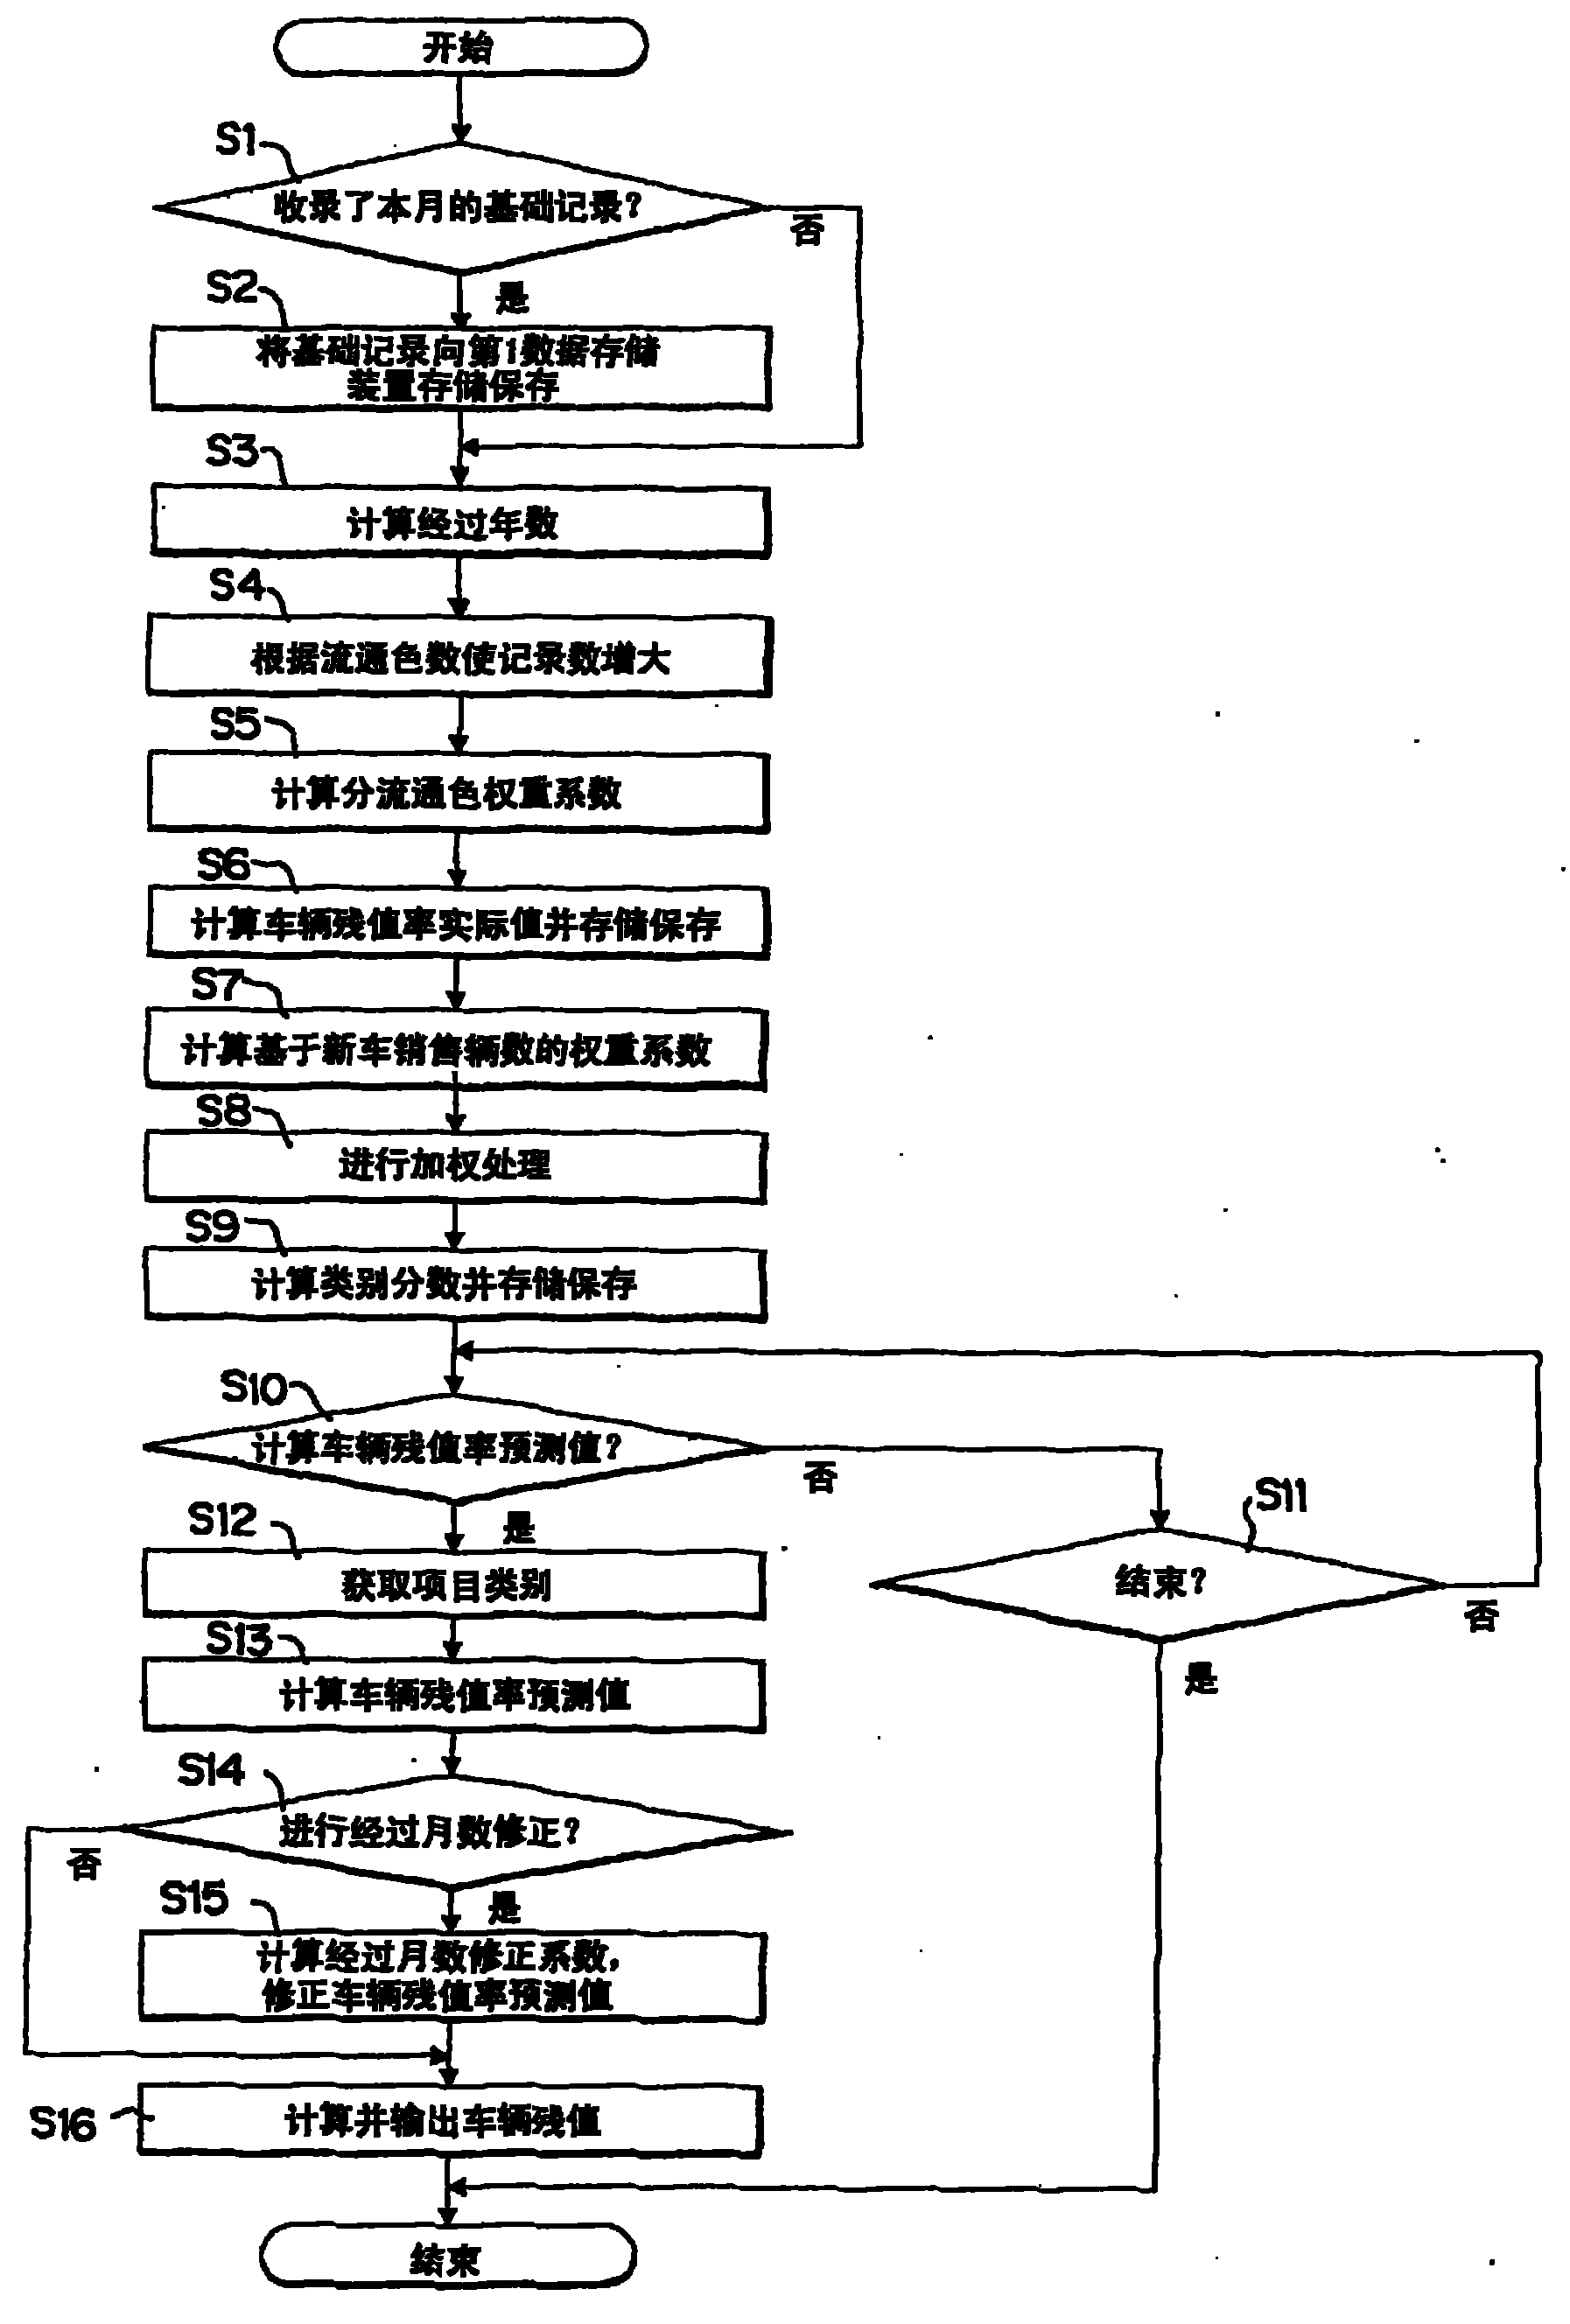 Article residual value predicting device